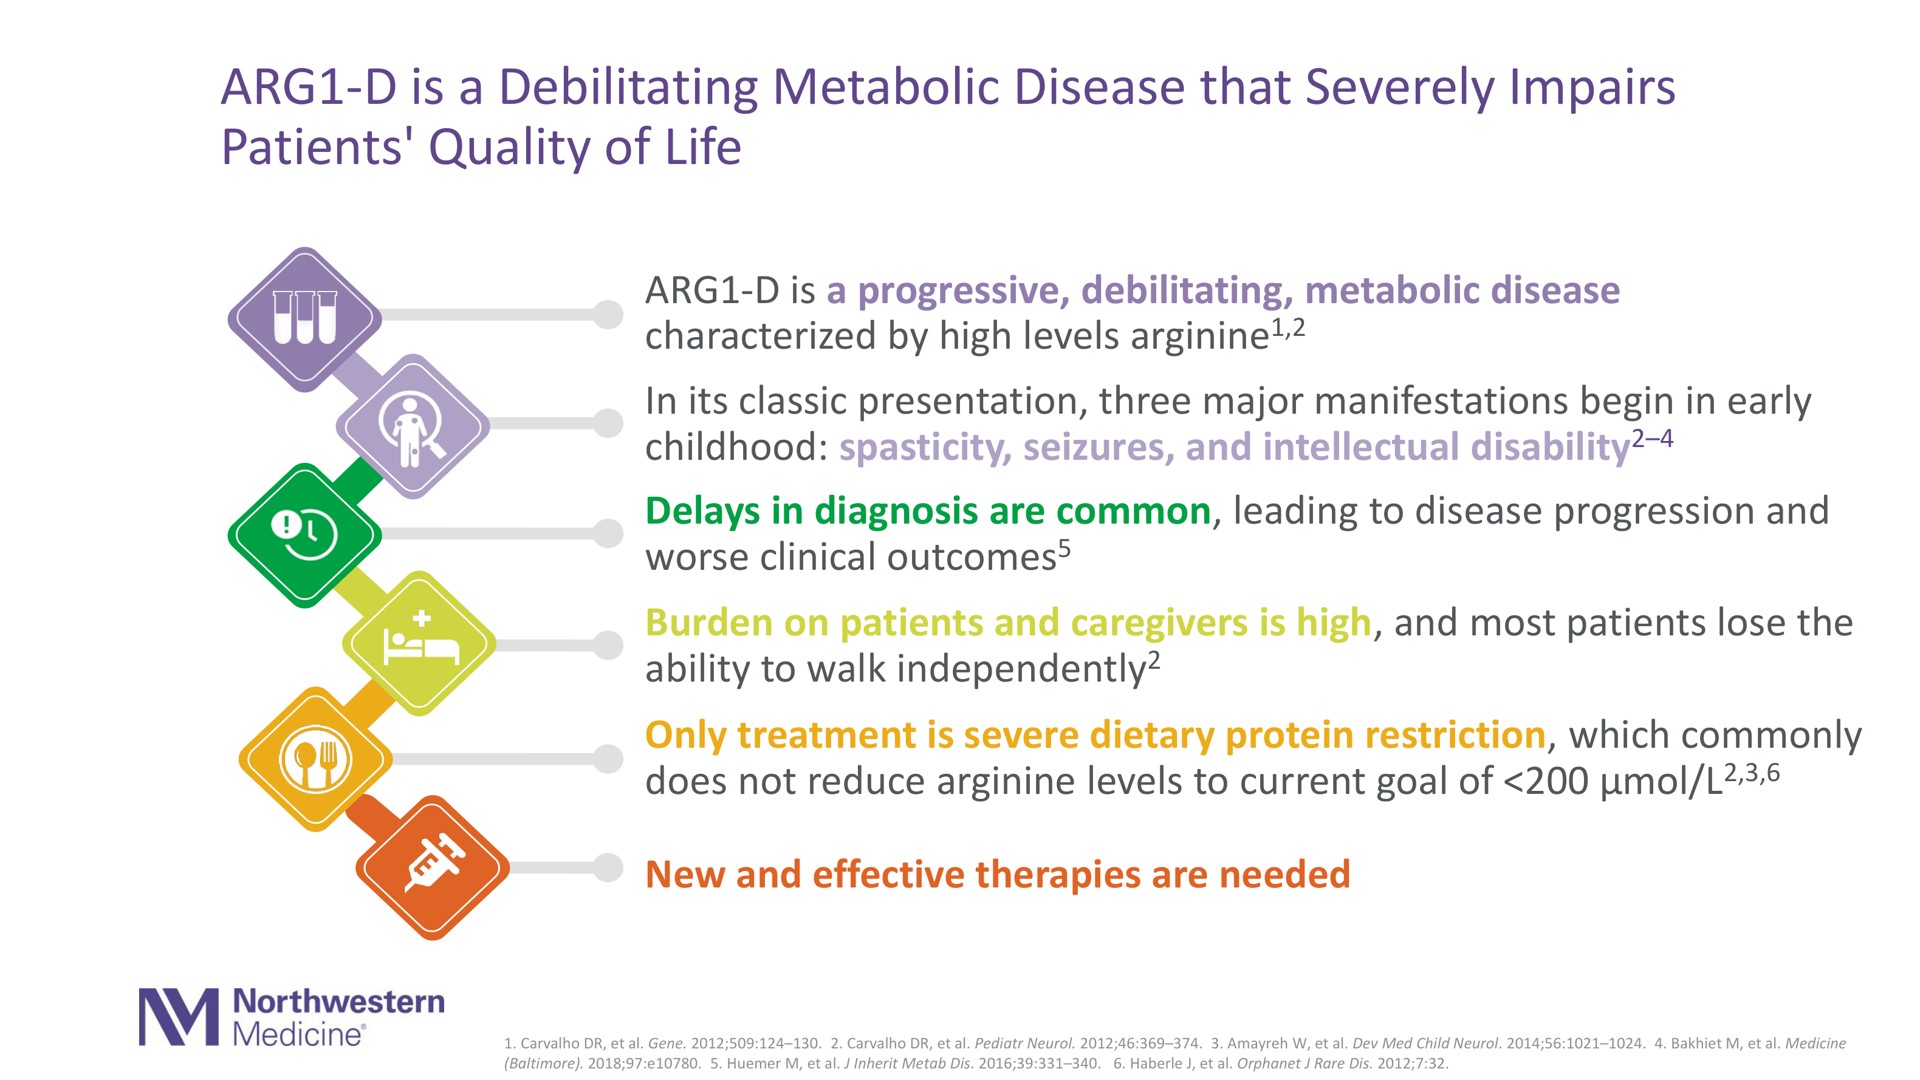 is a debilitating metabolic disease that severely impairs patients quality of life | Aeglea BioTherapeutics